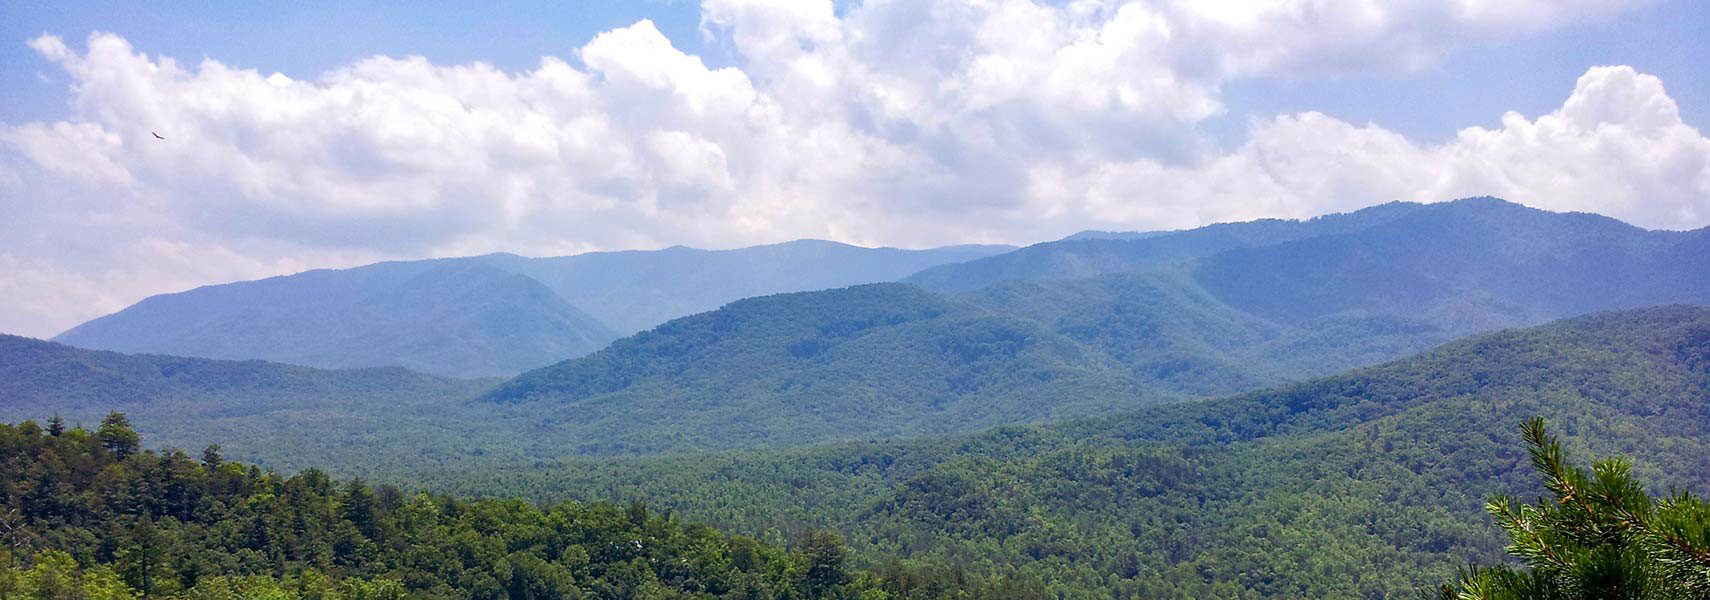 Great Smoky Mountains in Tennessee